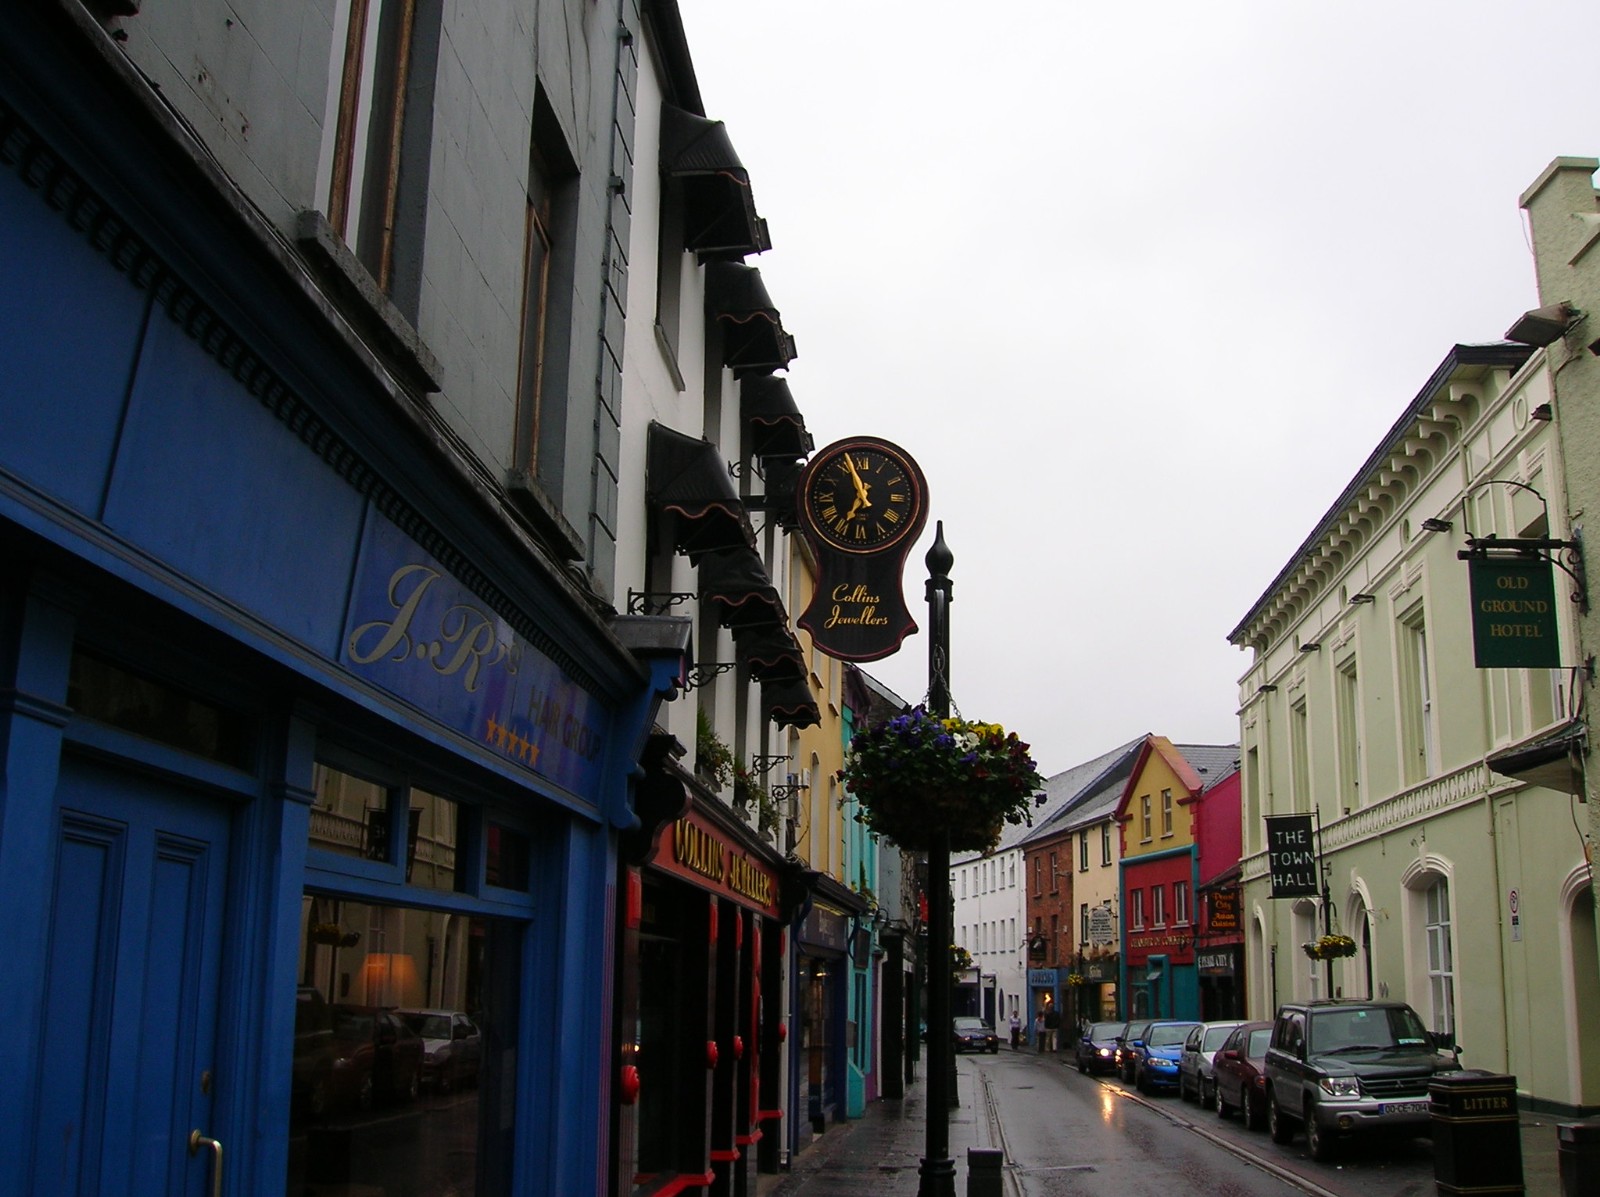 Ennis, Ireland Events & Things To Do | Eventbrite